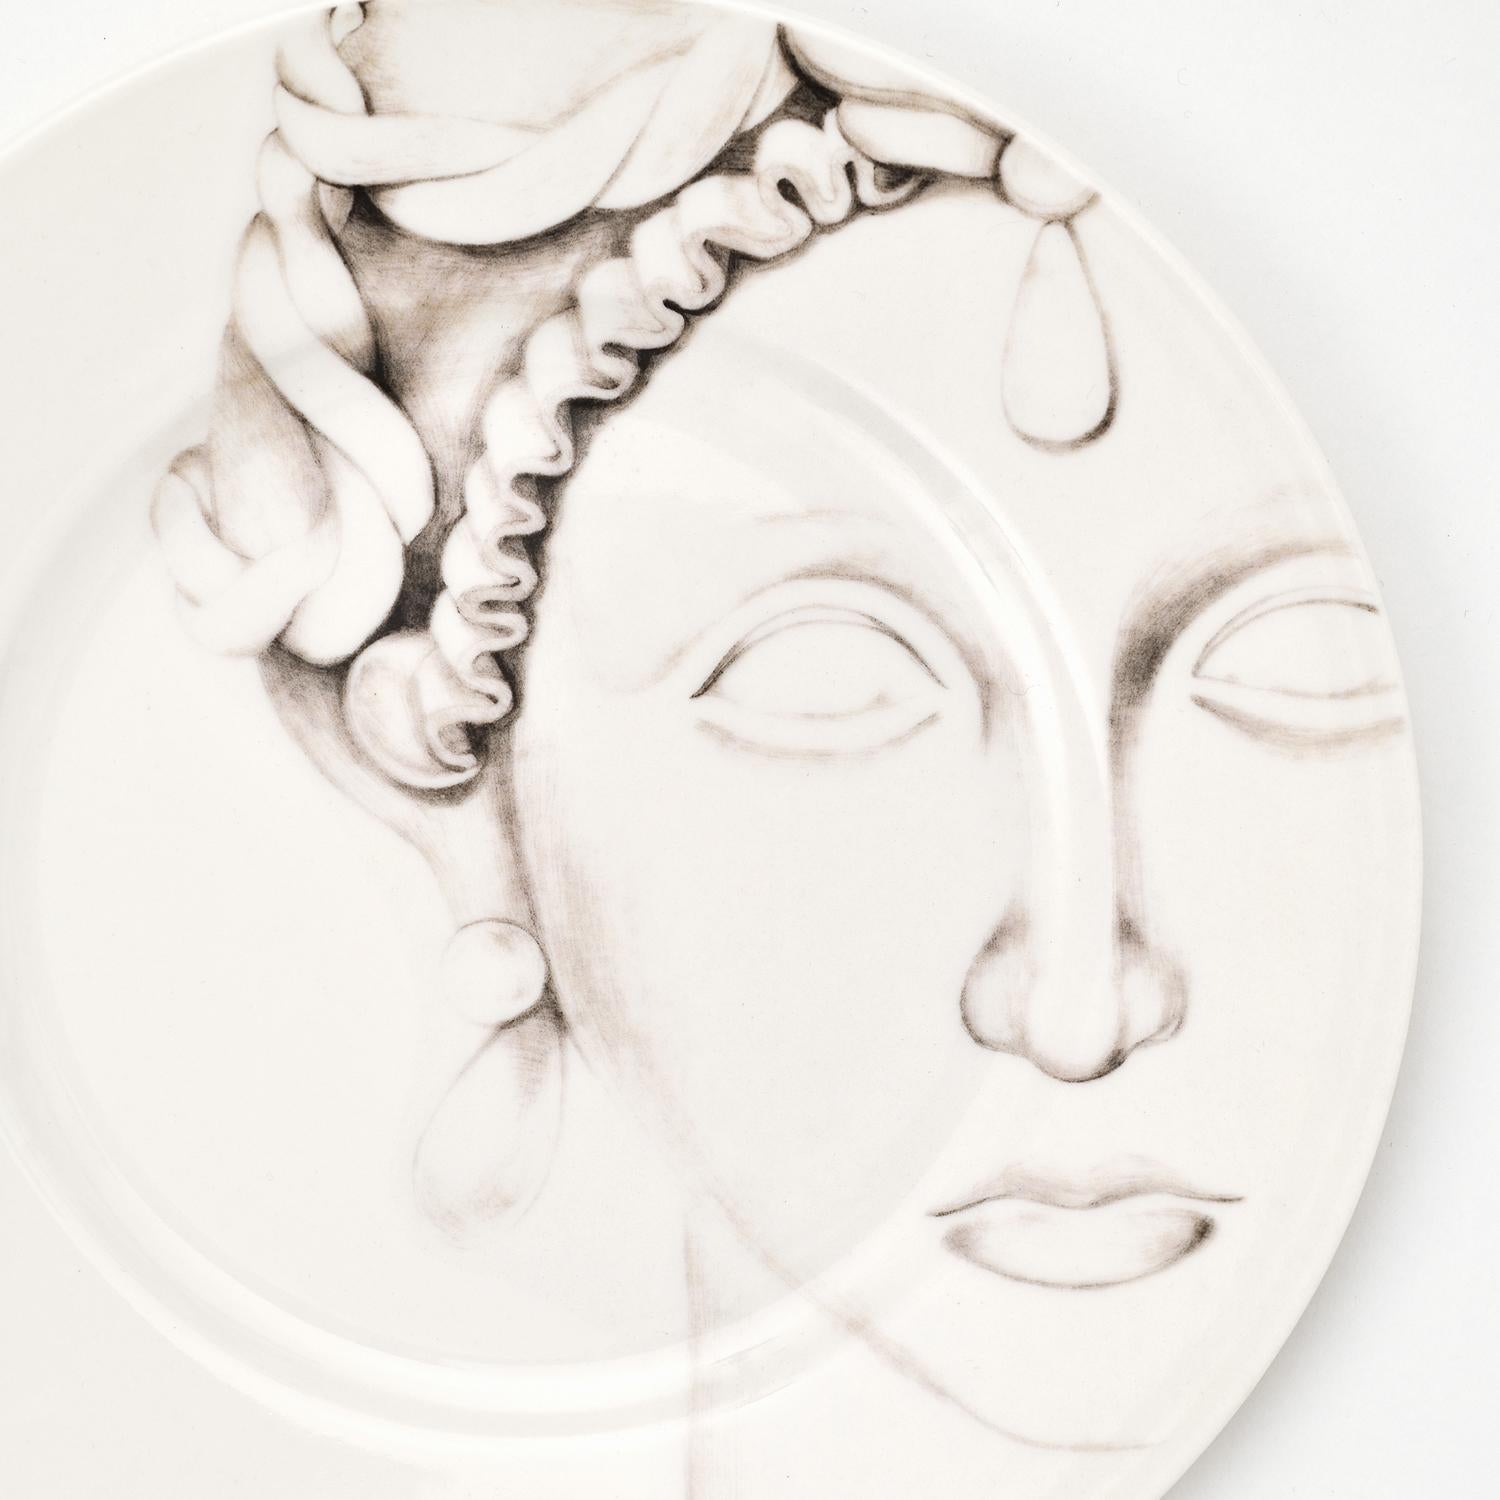 These captivating Catalina dessert plate belongs to the Teste di Moro Collection of truly unique Italian dining ware. Inspired by the Sicilian Moor's Head tradition, these incredibly detailed plates are entirely handcrafted in refined porcelain.